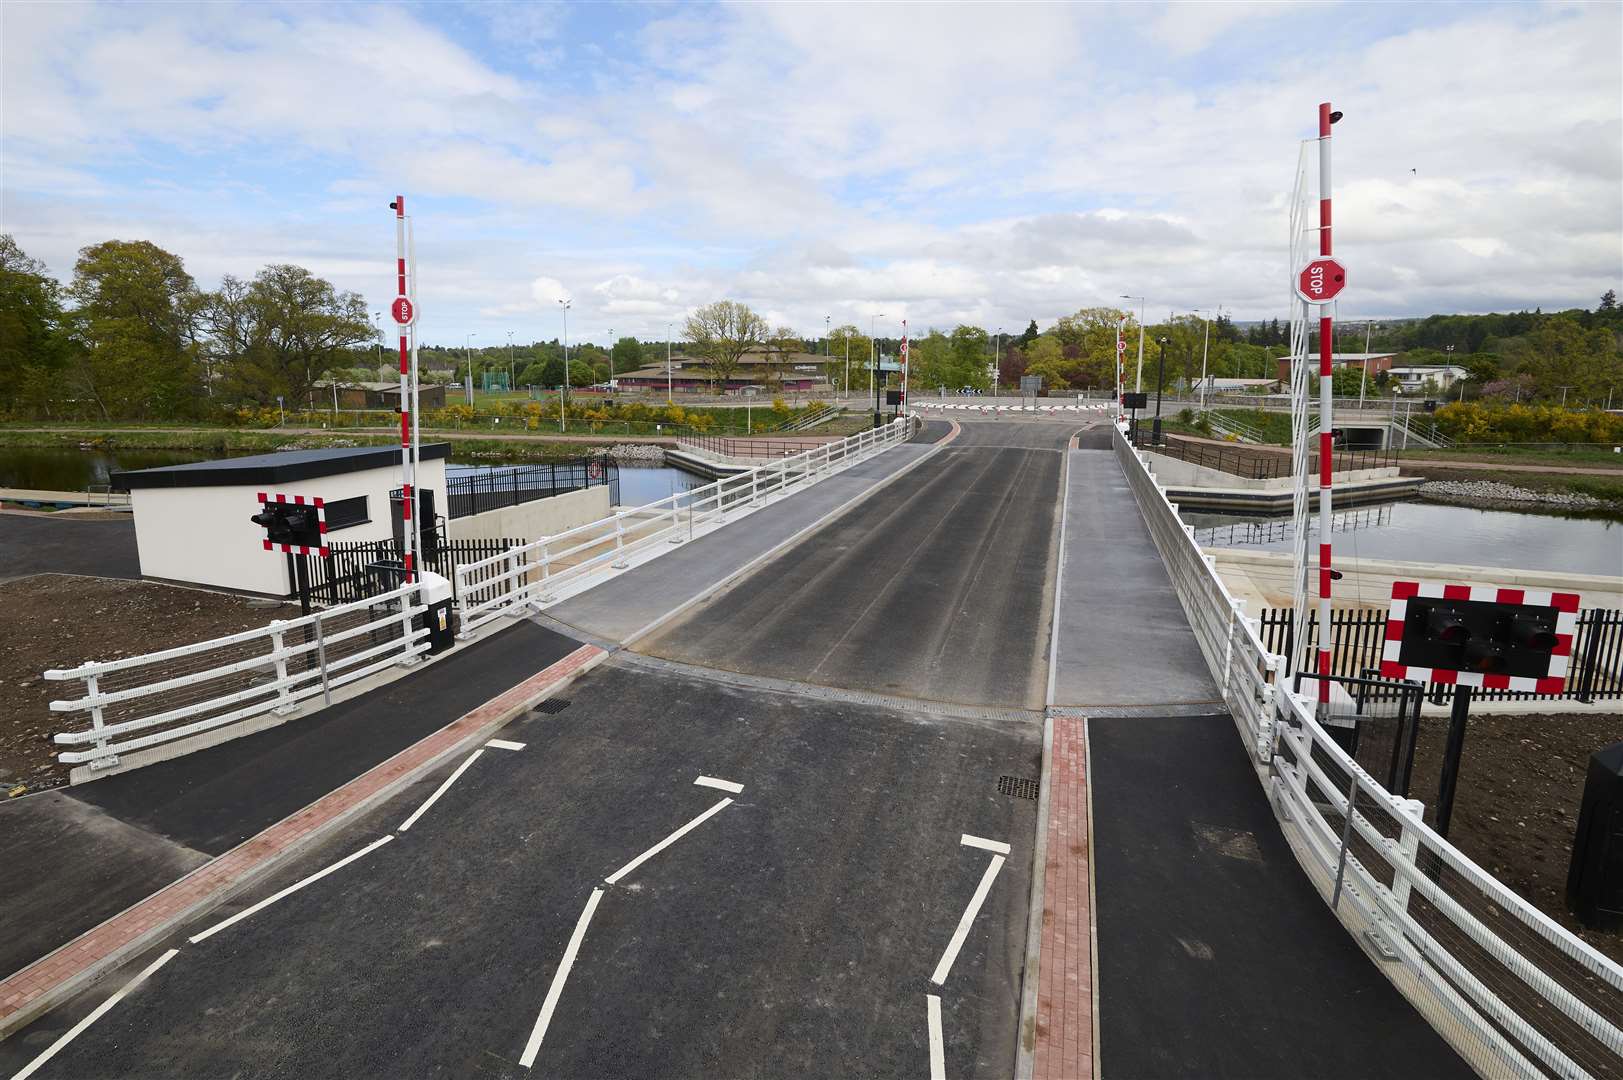 The new Torvean Bridge is due to open to drivers. Photo by Ewen Wetherspoon